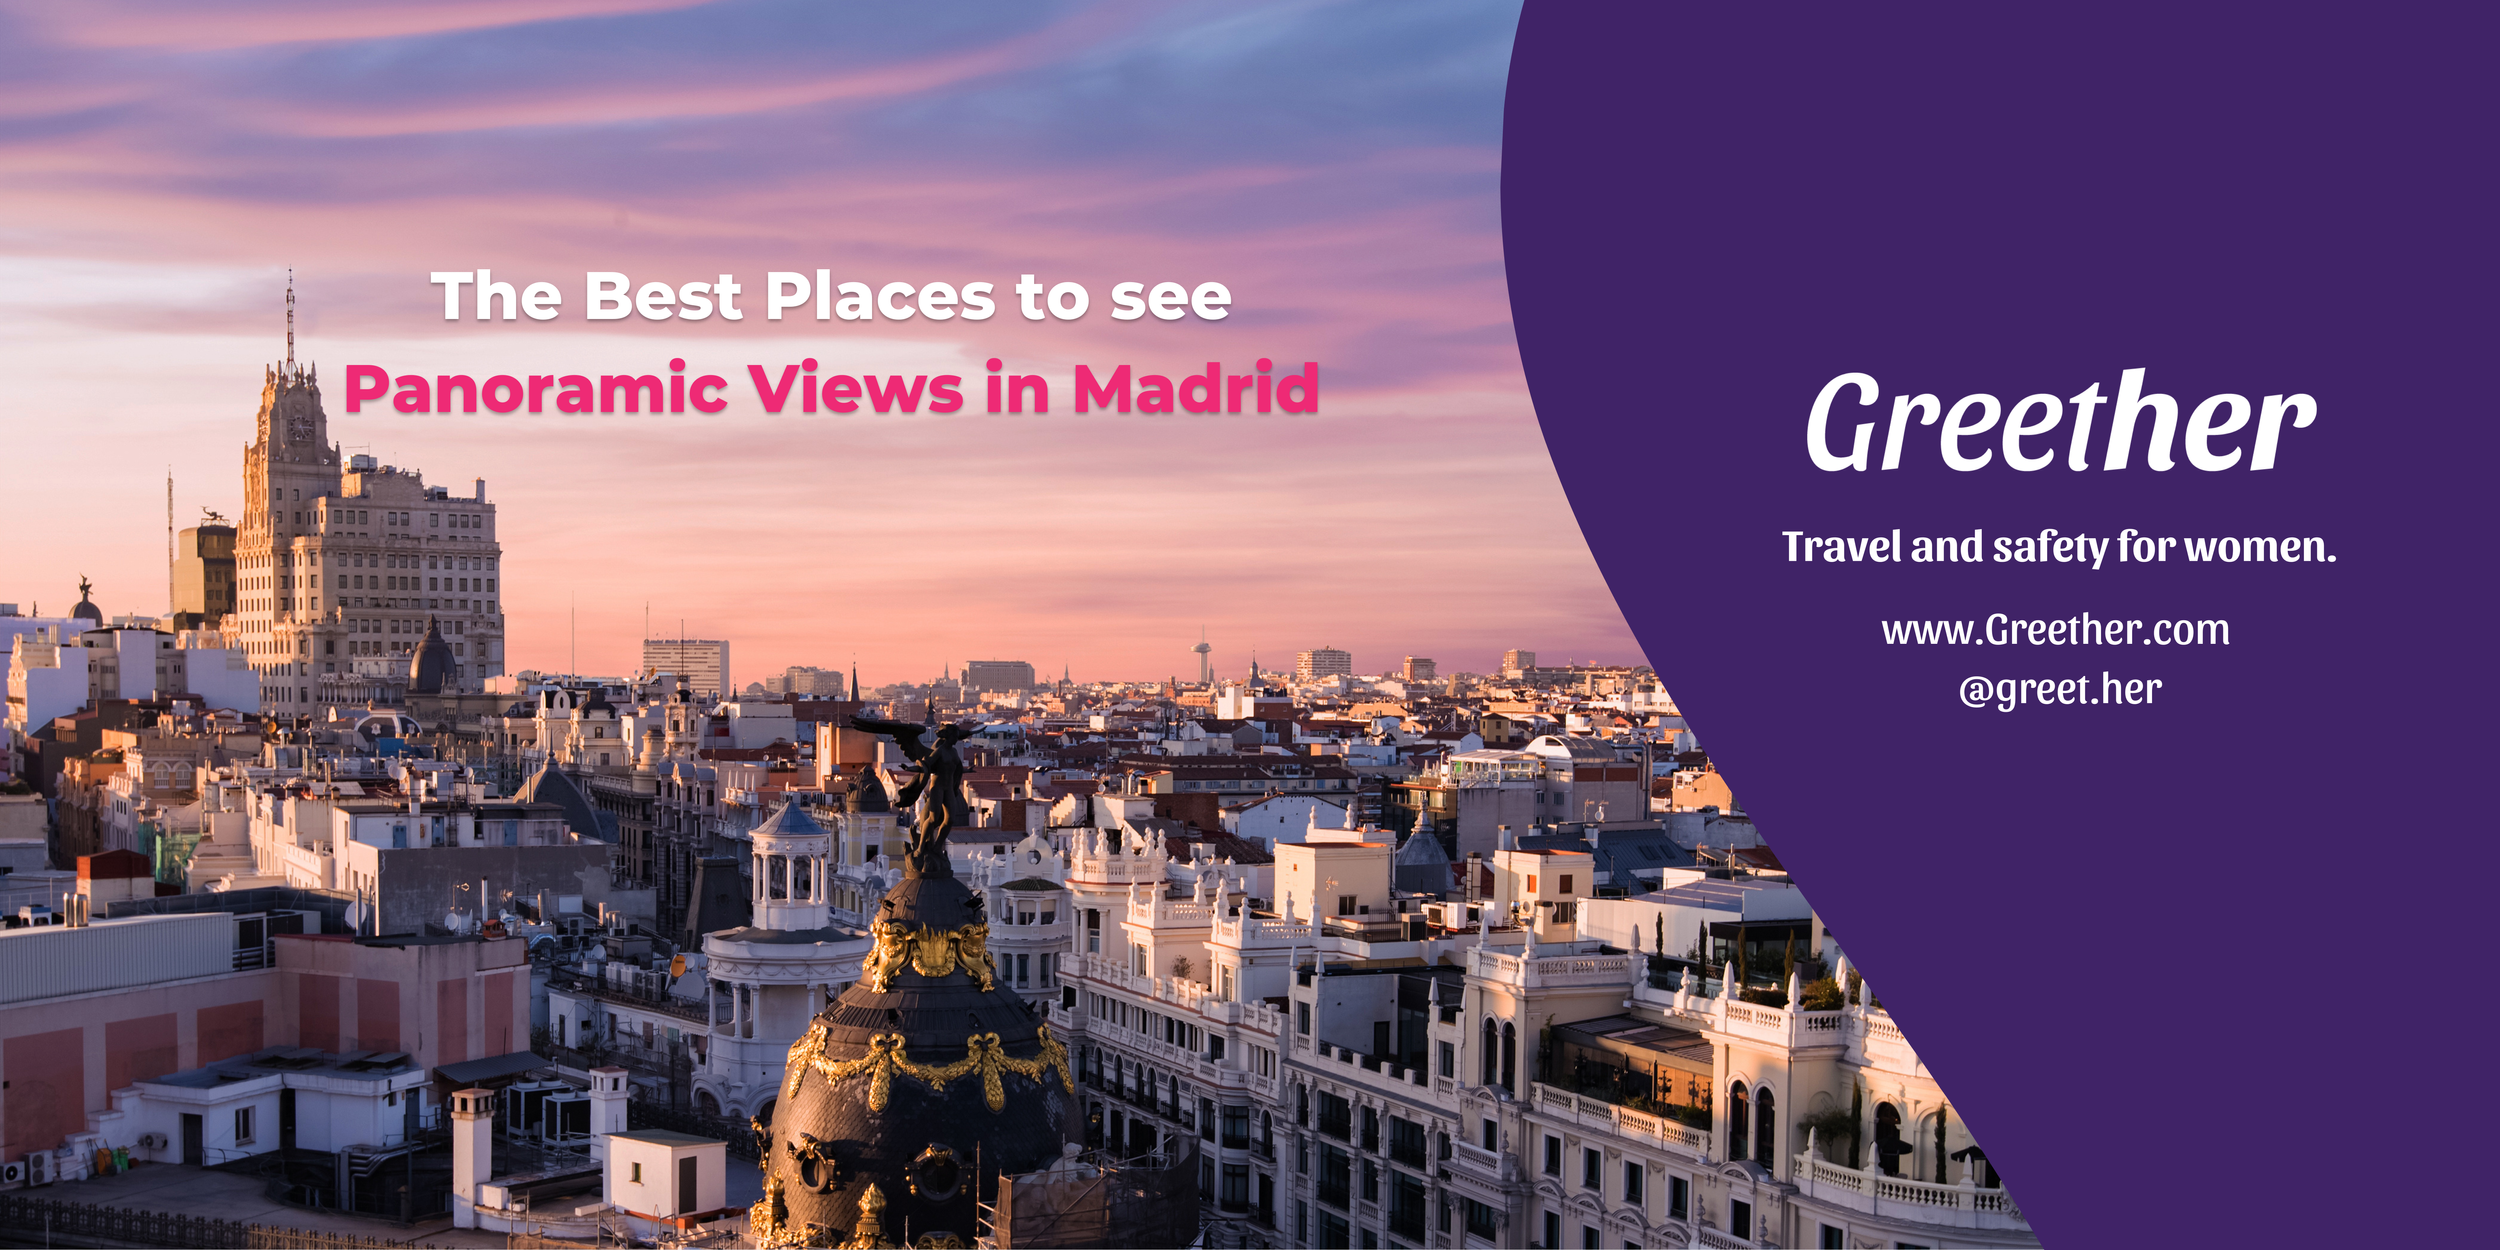 The Best Places to see Panoramic Views in Madrid